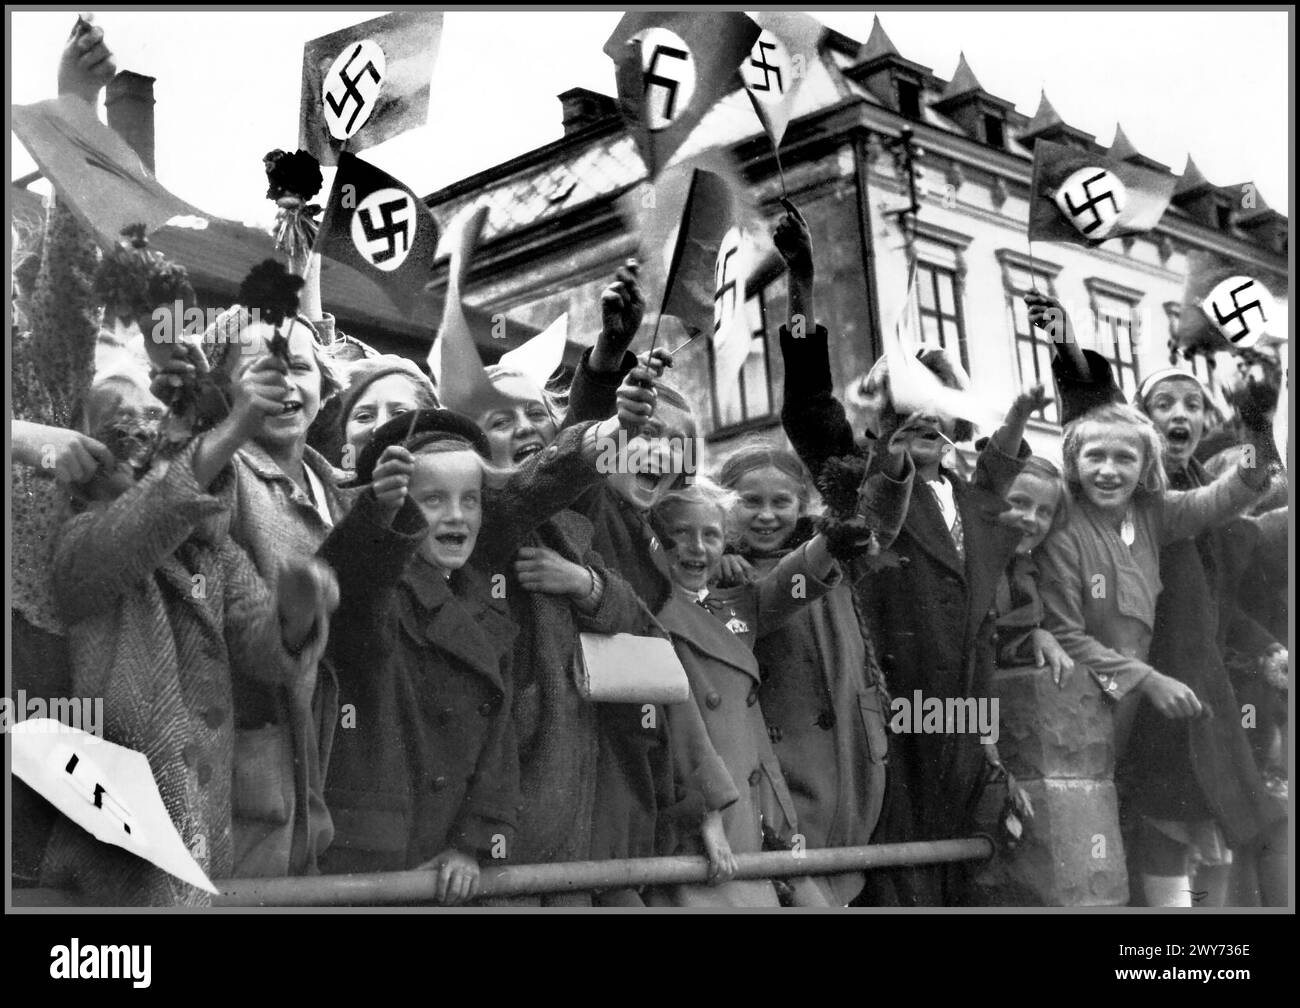 1938 Nazi Propaganda image of young ethnic German children of the Czechoslovakian town of Trautenau (Trautenau is the German name, Czechoslovakian is Trutnov) greet the incoming occupying Nazi Wehrmacht troops. Trautenau Czechoslovakia.  The military occupation of Czechoslovakia by Nazi Germany began with the German annexation of the Sudetenland in 1938, continued with the creation of the Protectorate of Bohemia and Moravia, and by the end of 1944 extended to all parts of Czechoslovakia Stock Photo